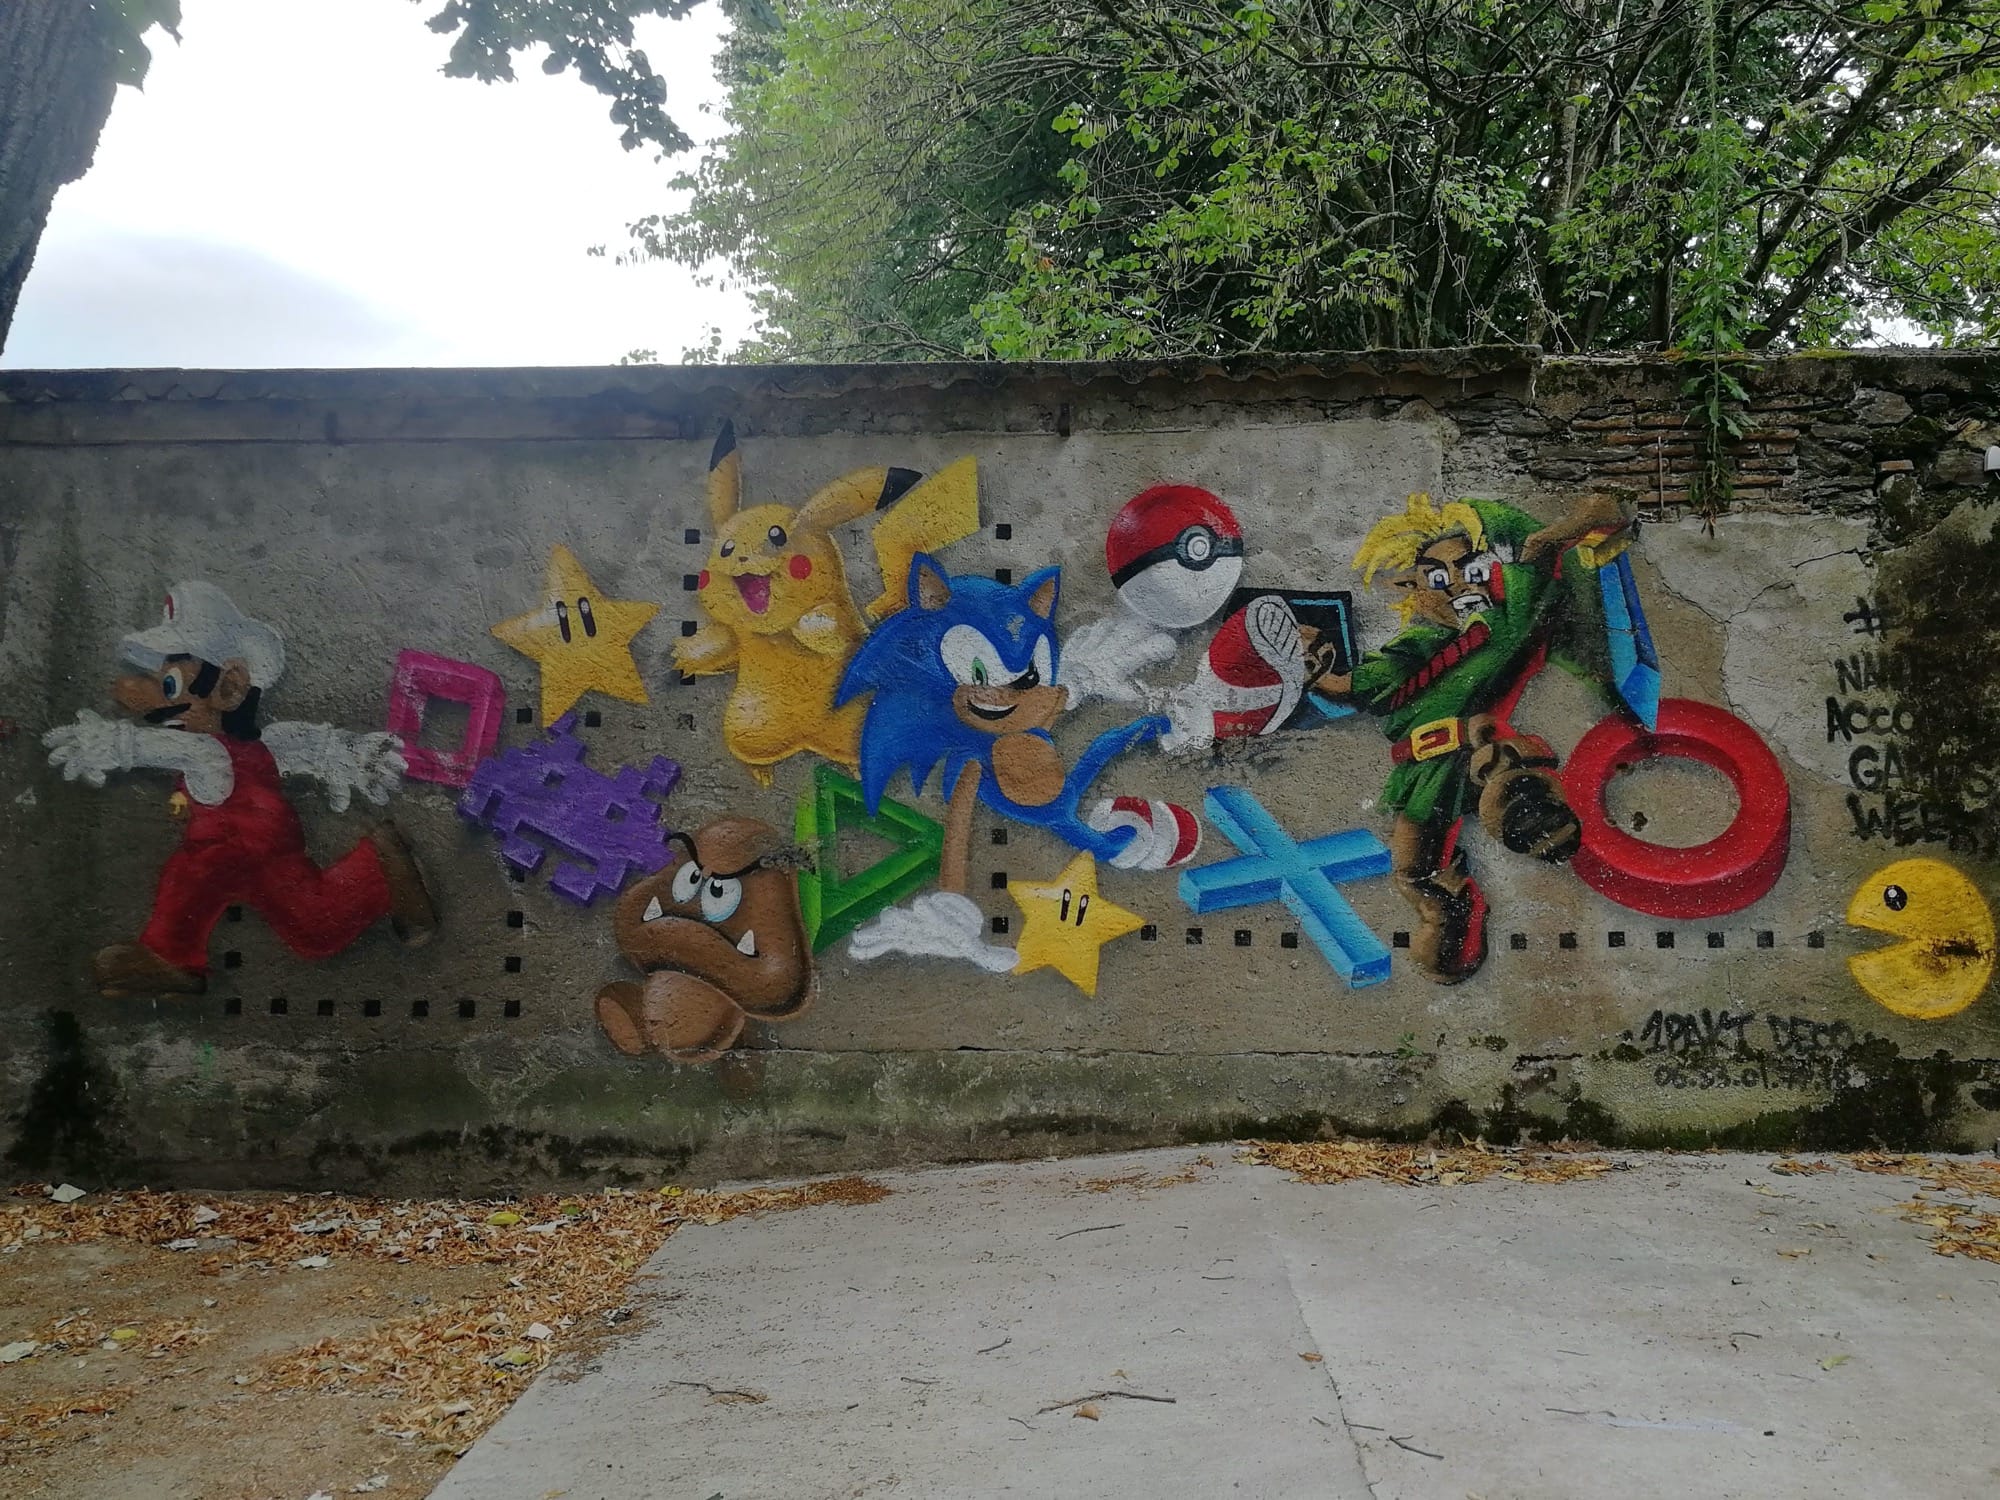 Graffiti 1979 Mario, Pikachu, Pacman, Sonic, Link captured by Rabot in Nantes France